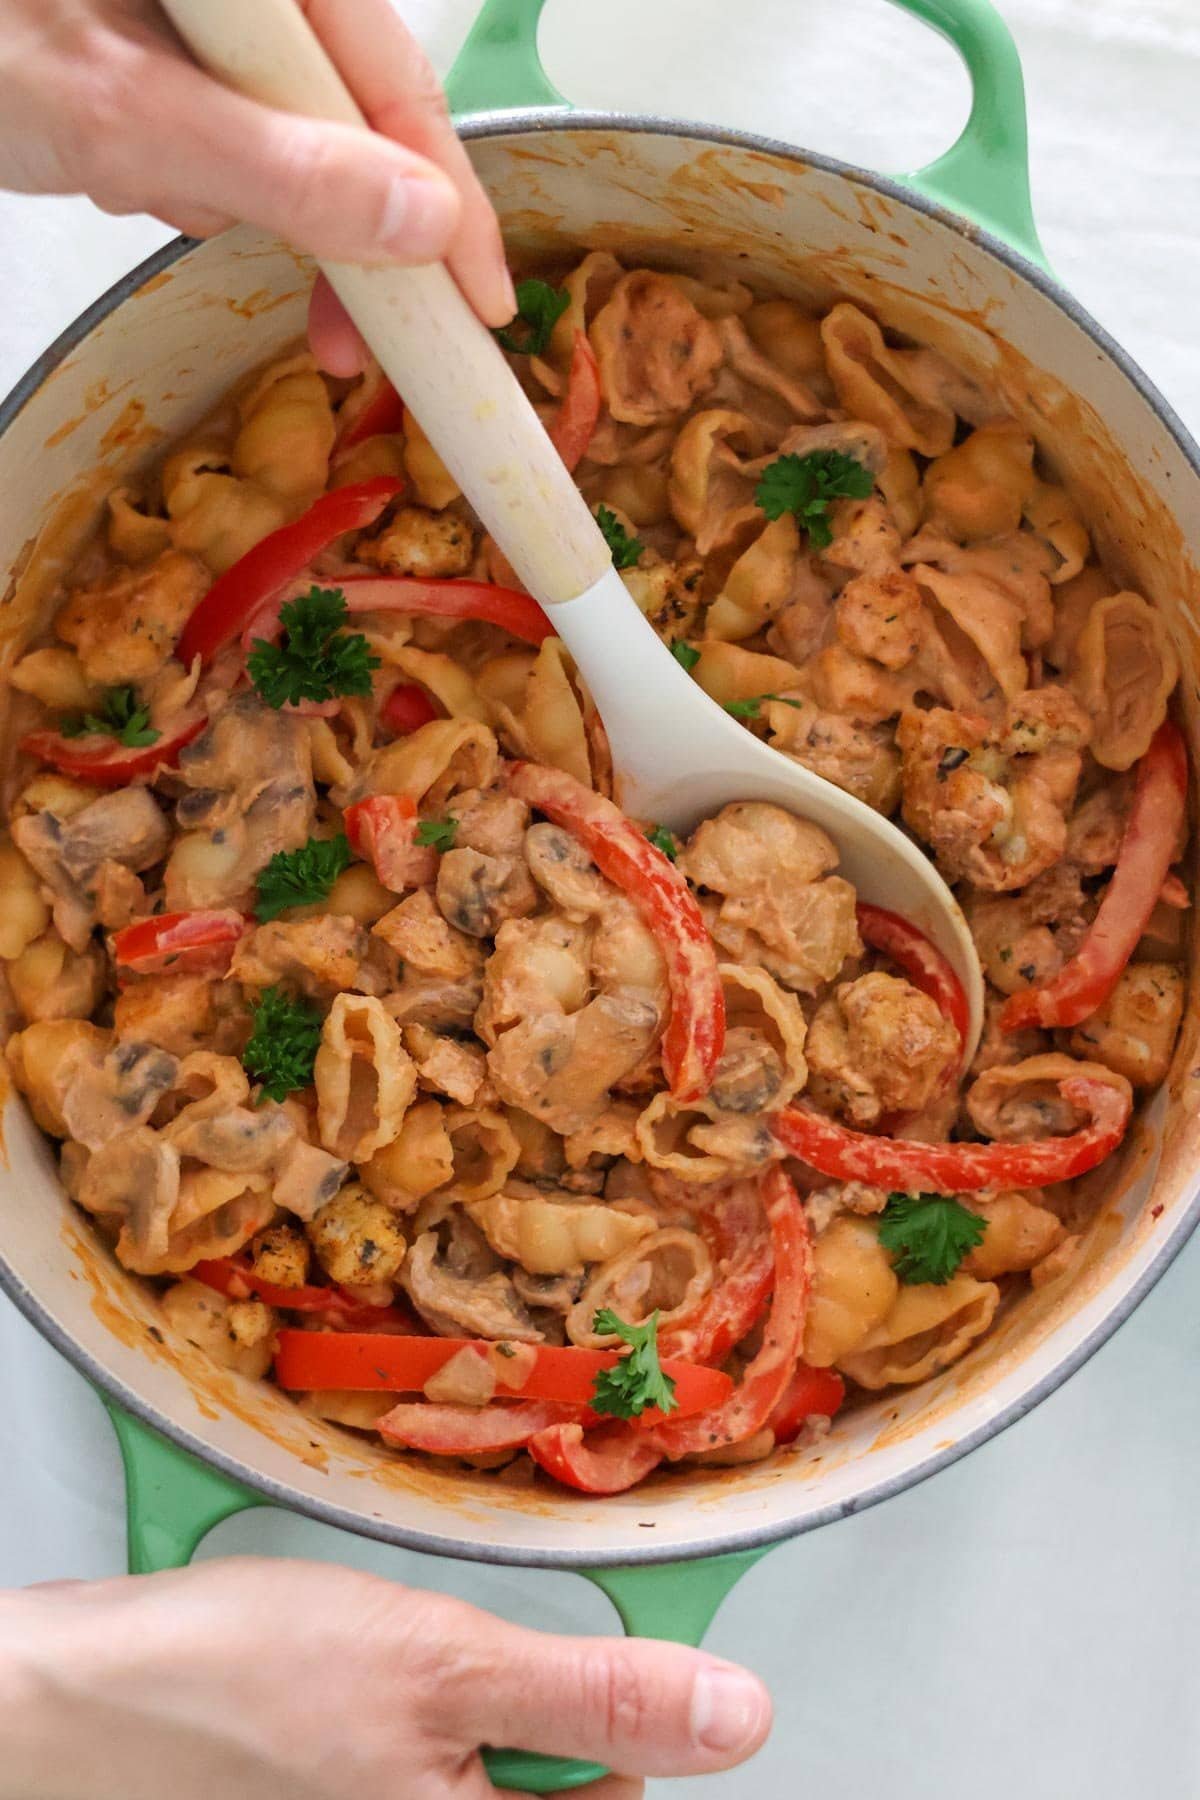 The Healthy Vegan Mushroom Stroganoff with pasta and parsley is scooped up with a spoon from a large green pot.